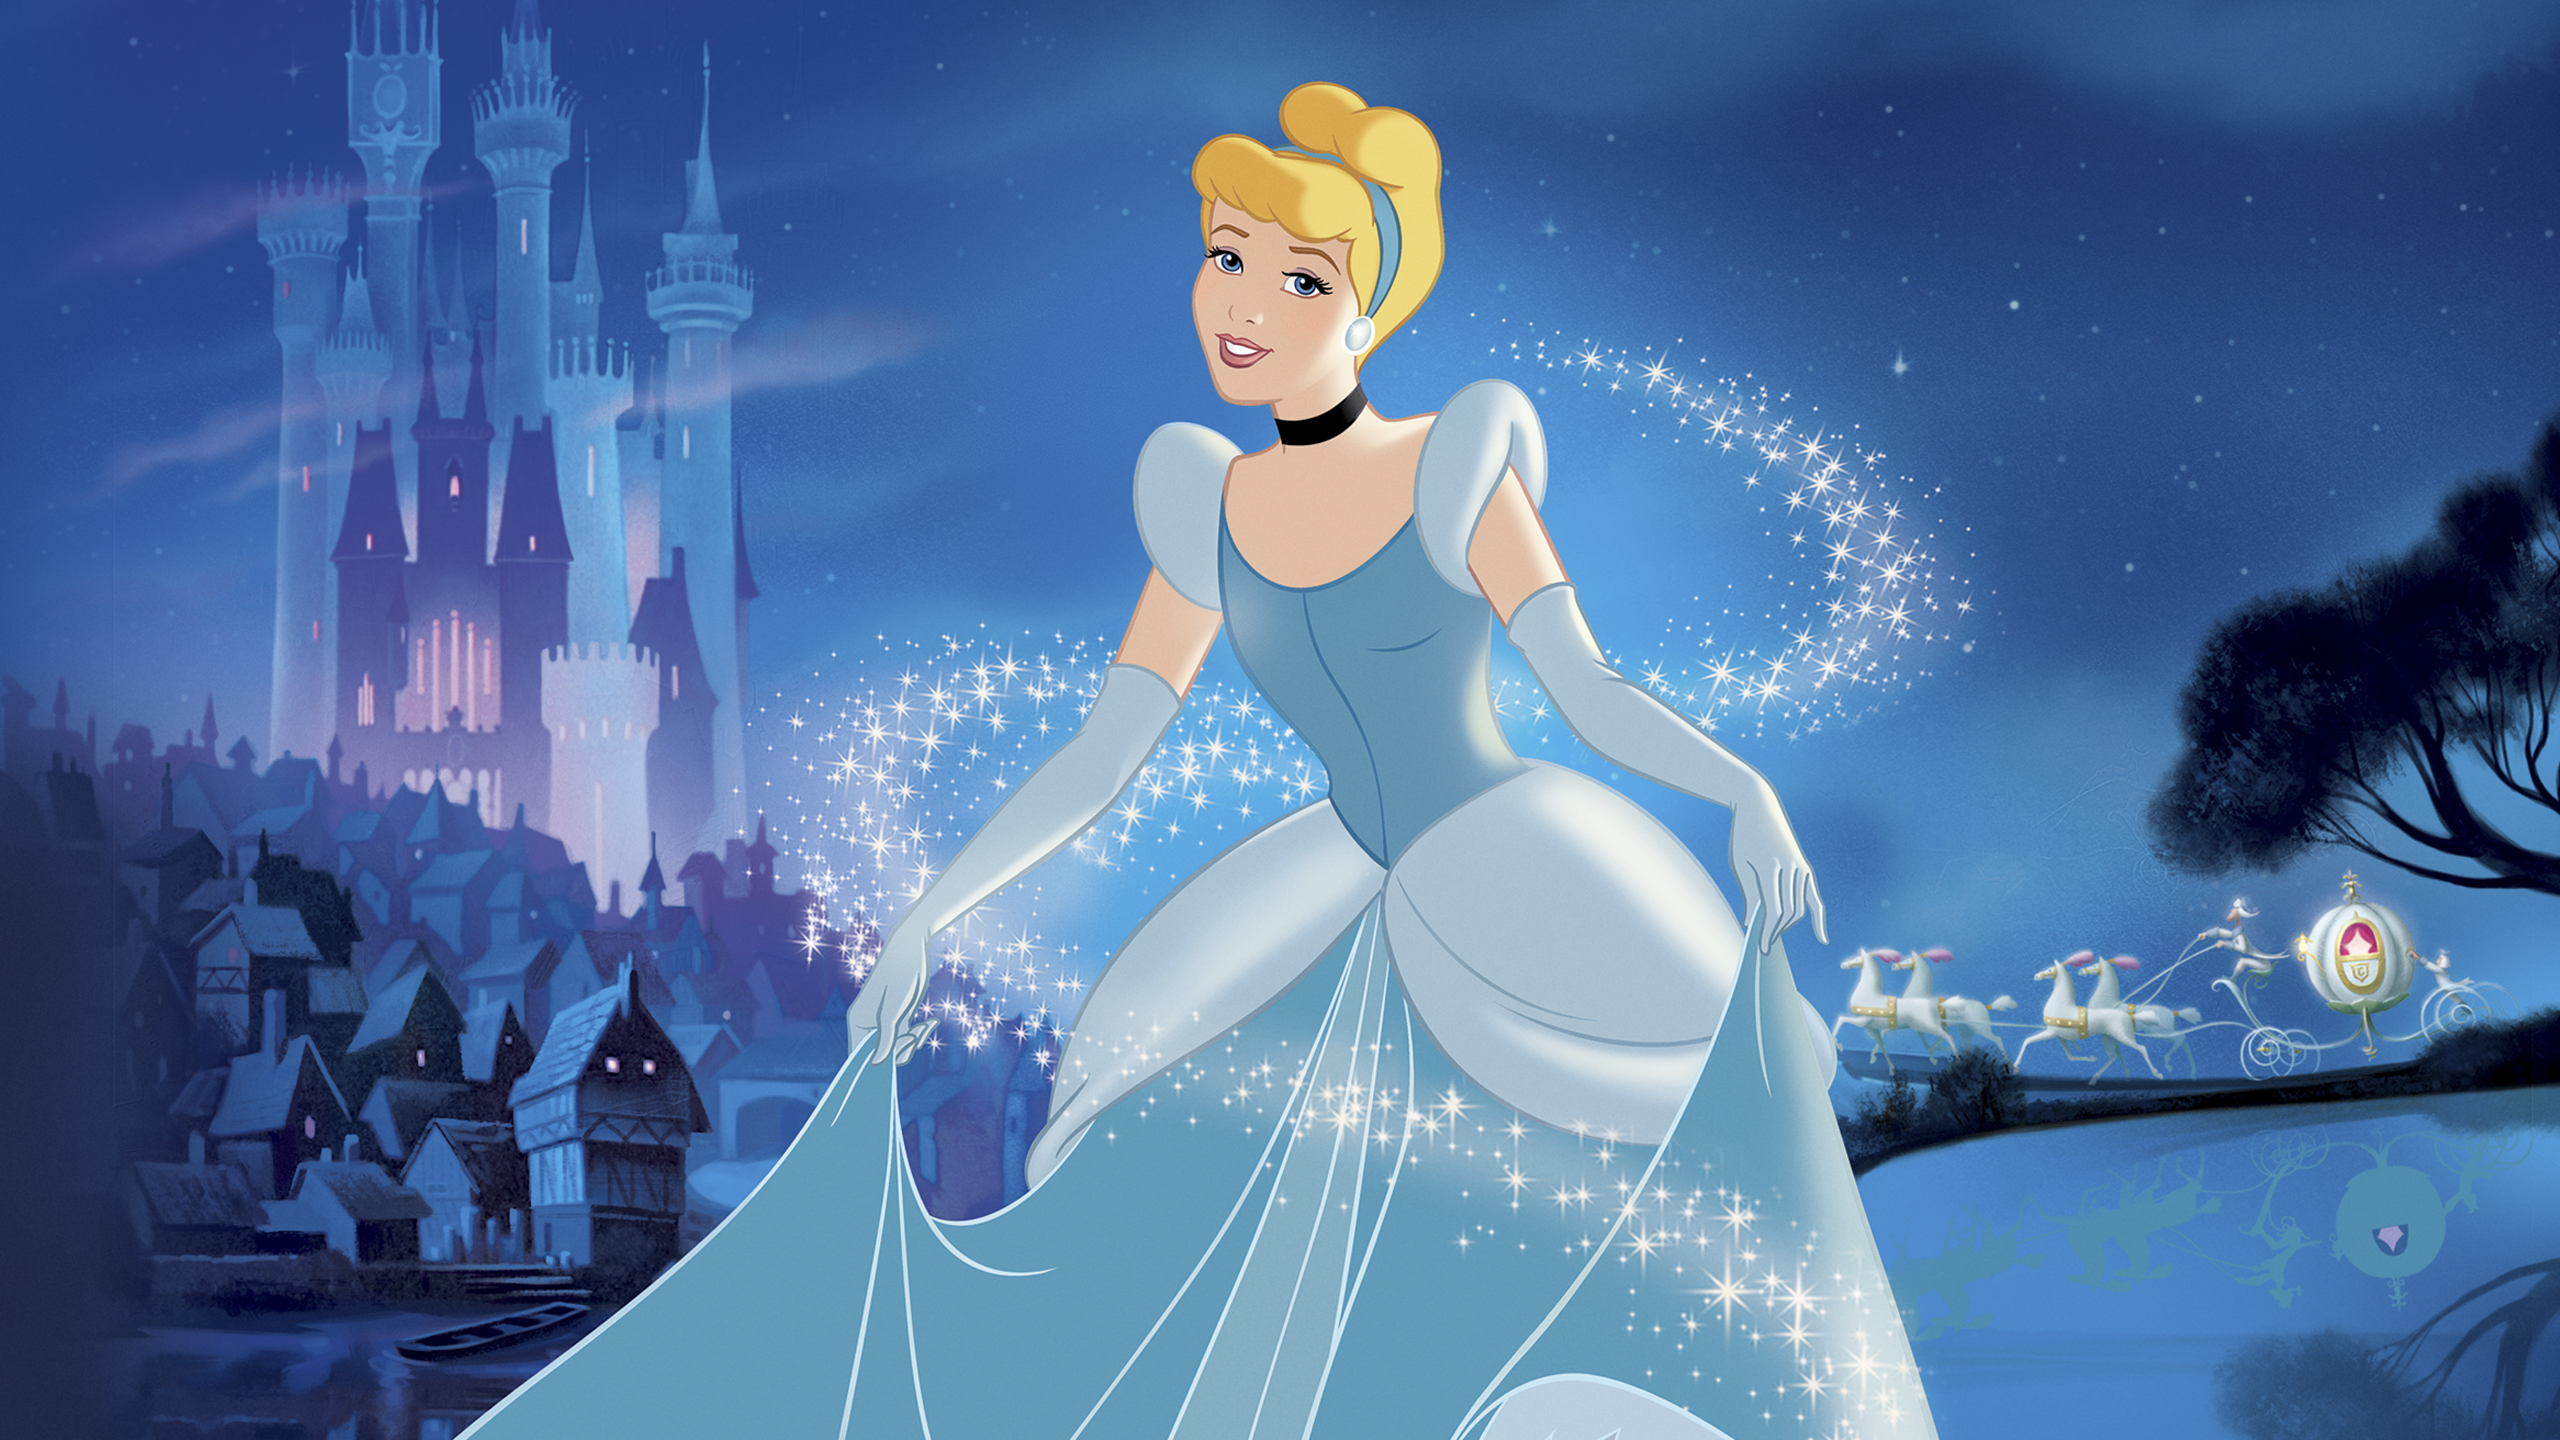 bryce orr recommends cartoon cinderella full movie pic